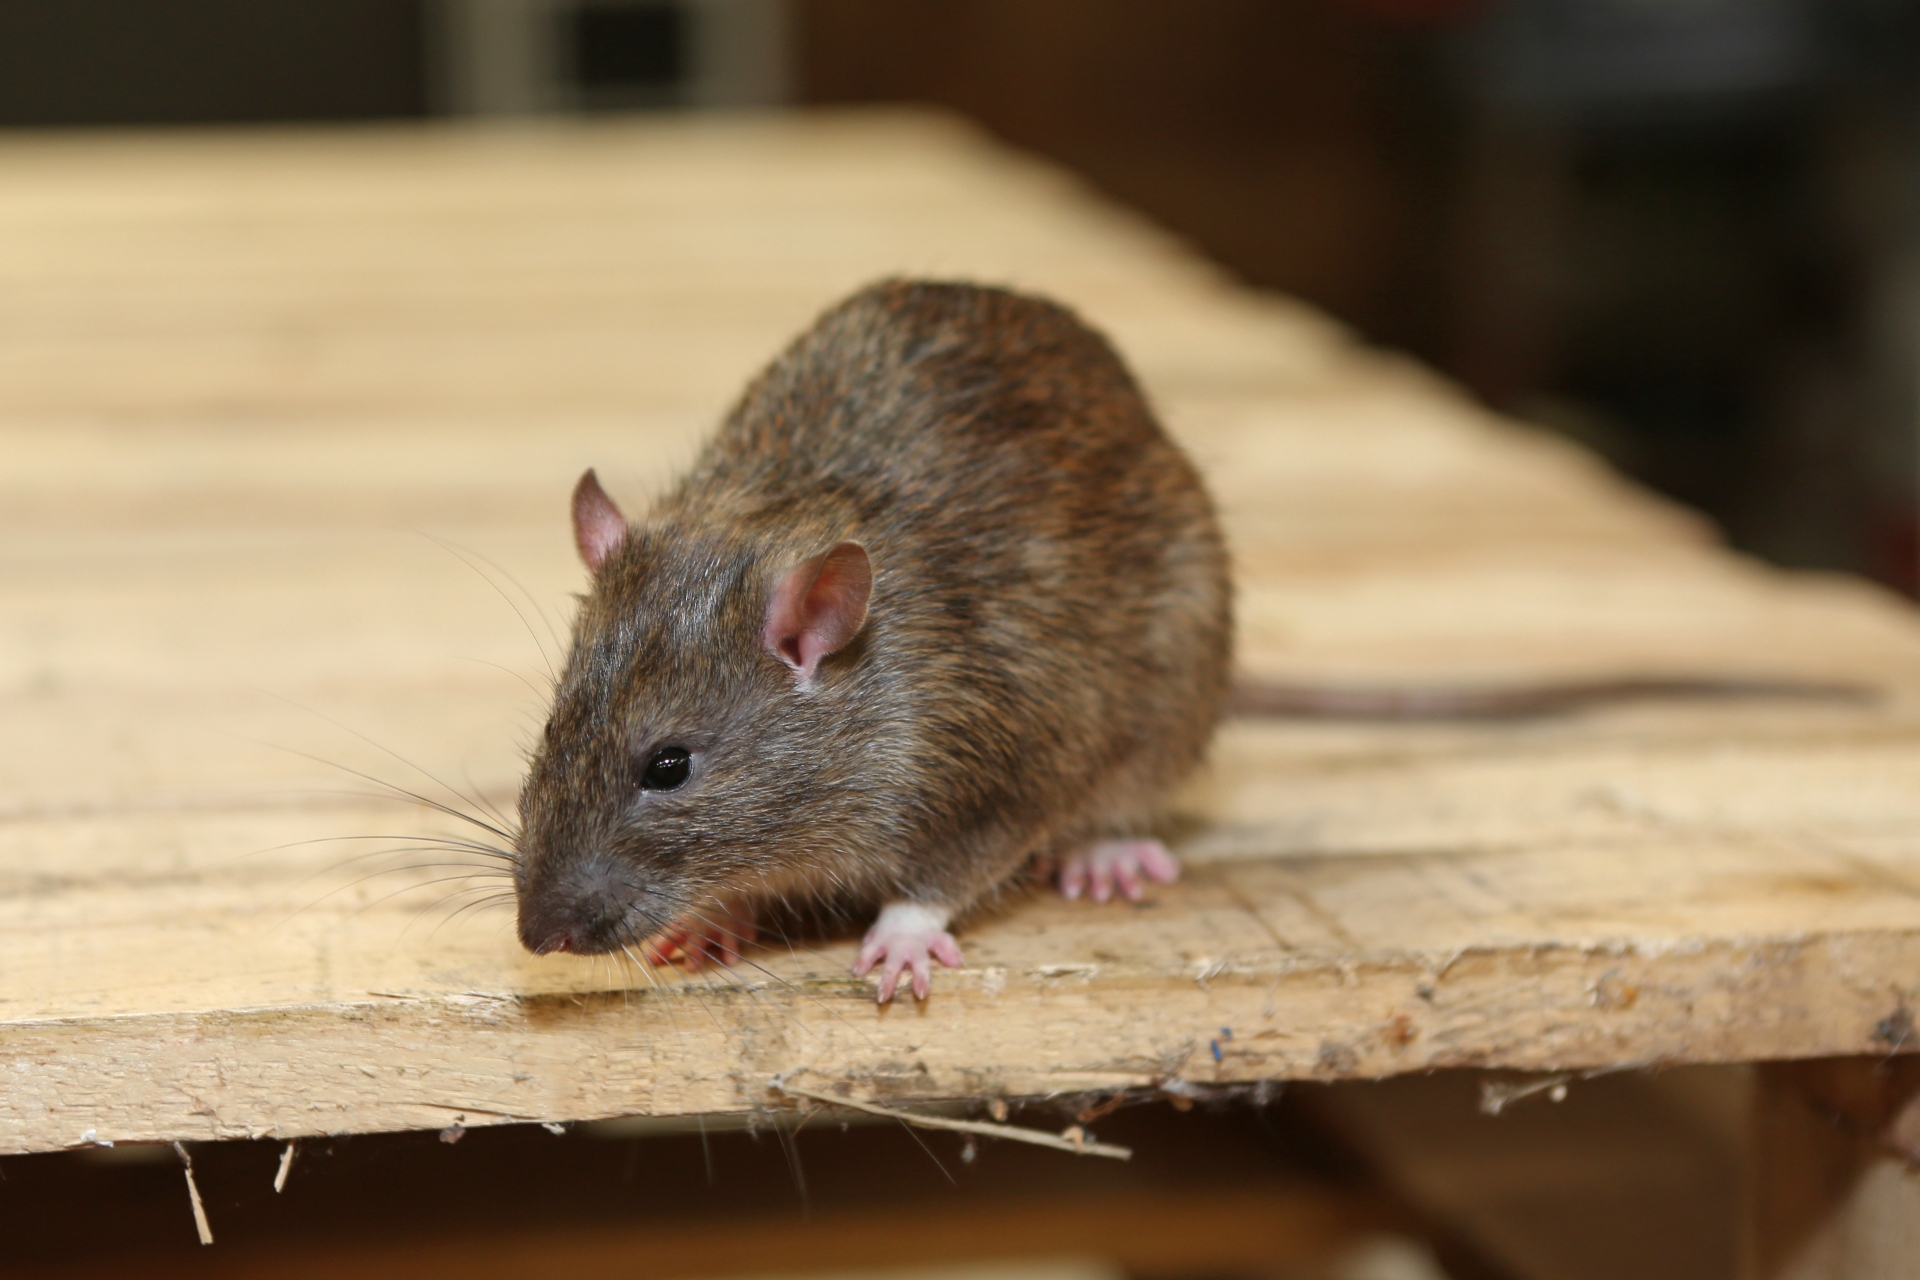 Rat Infestation, Pest Control in Plumstead, SE18. Call Now 020 8166 9746